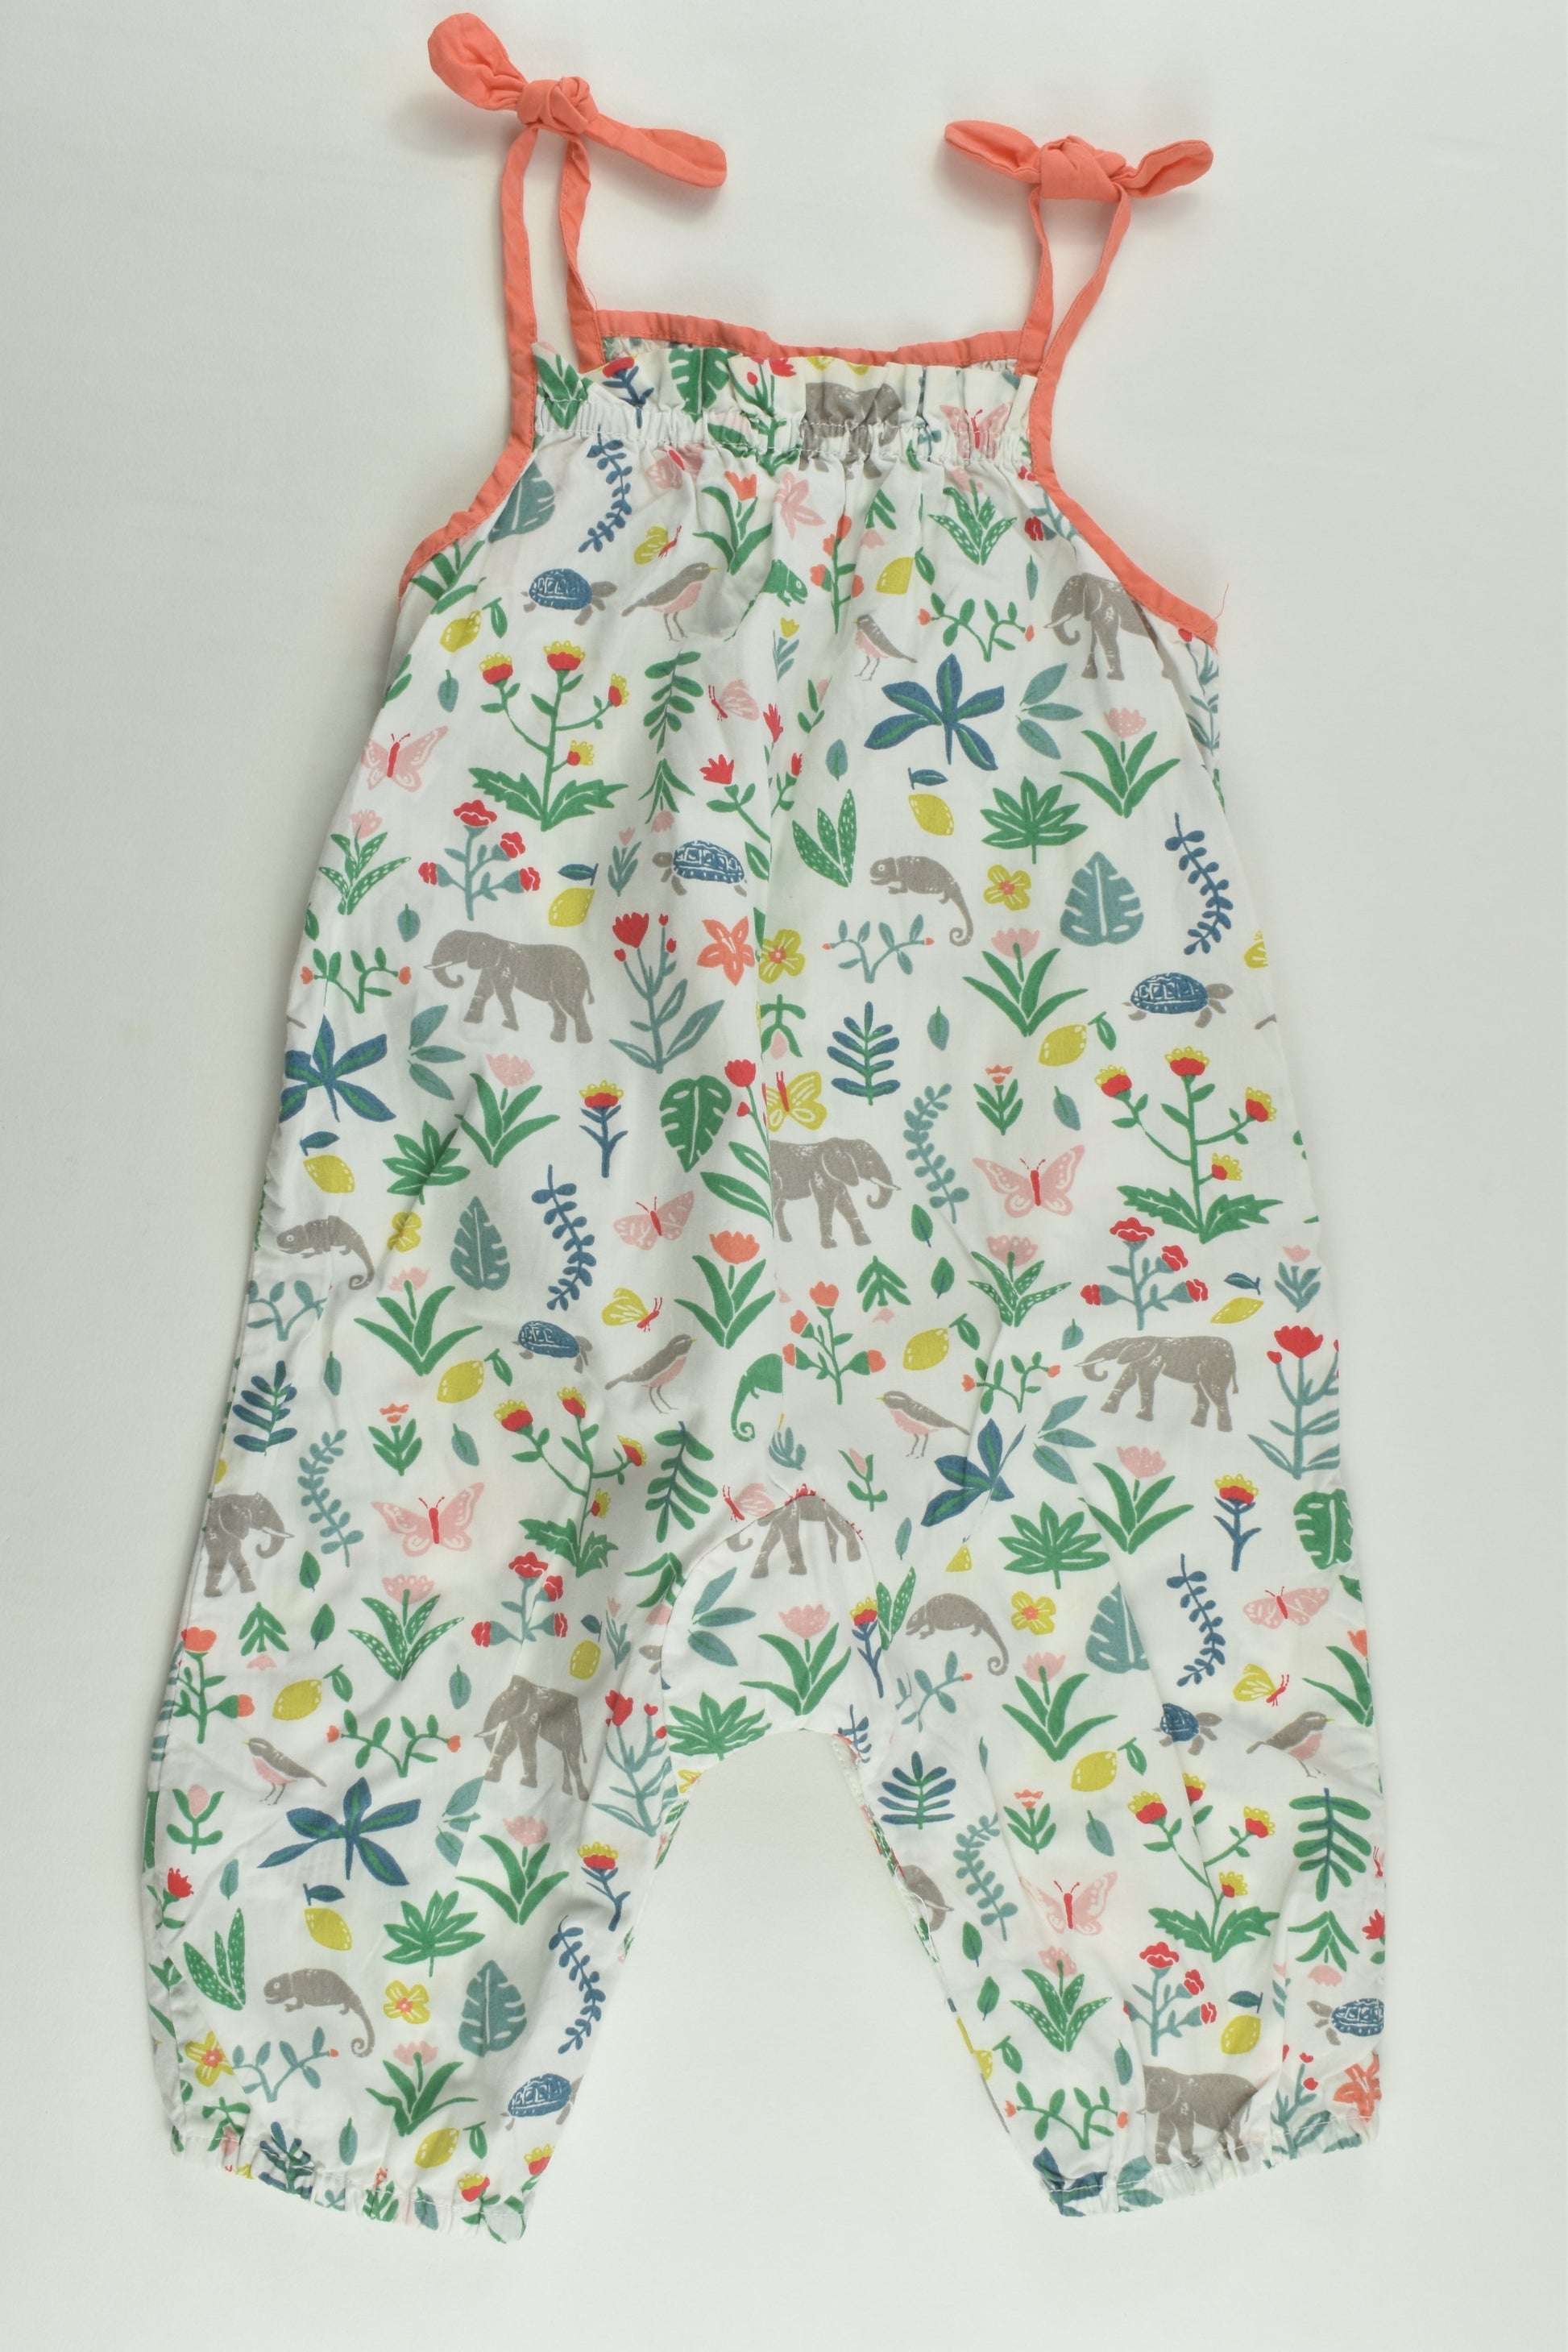 Baby Boden Size 00 (3-6 months) Lightweight Animals and Plants Playsuit